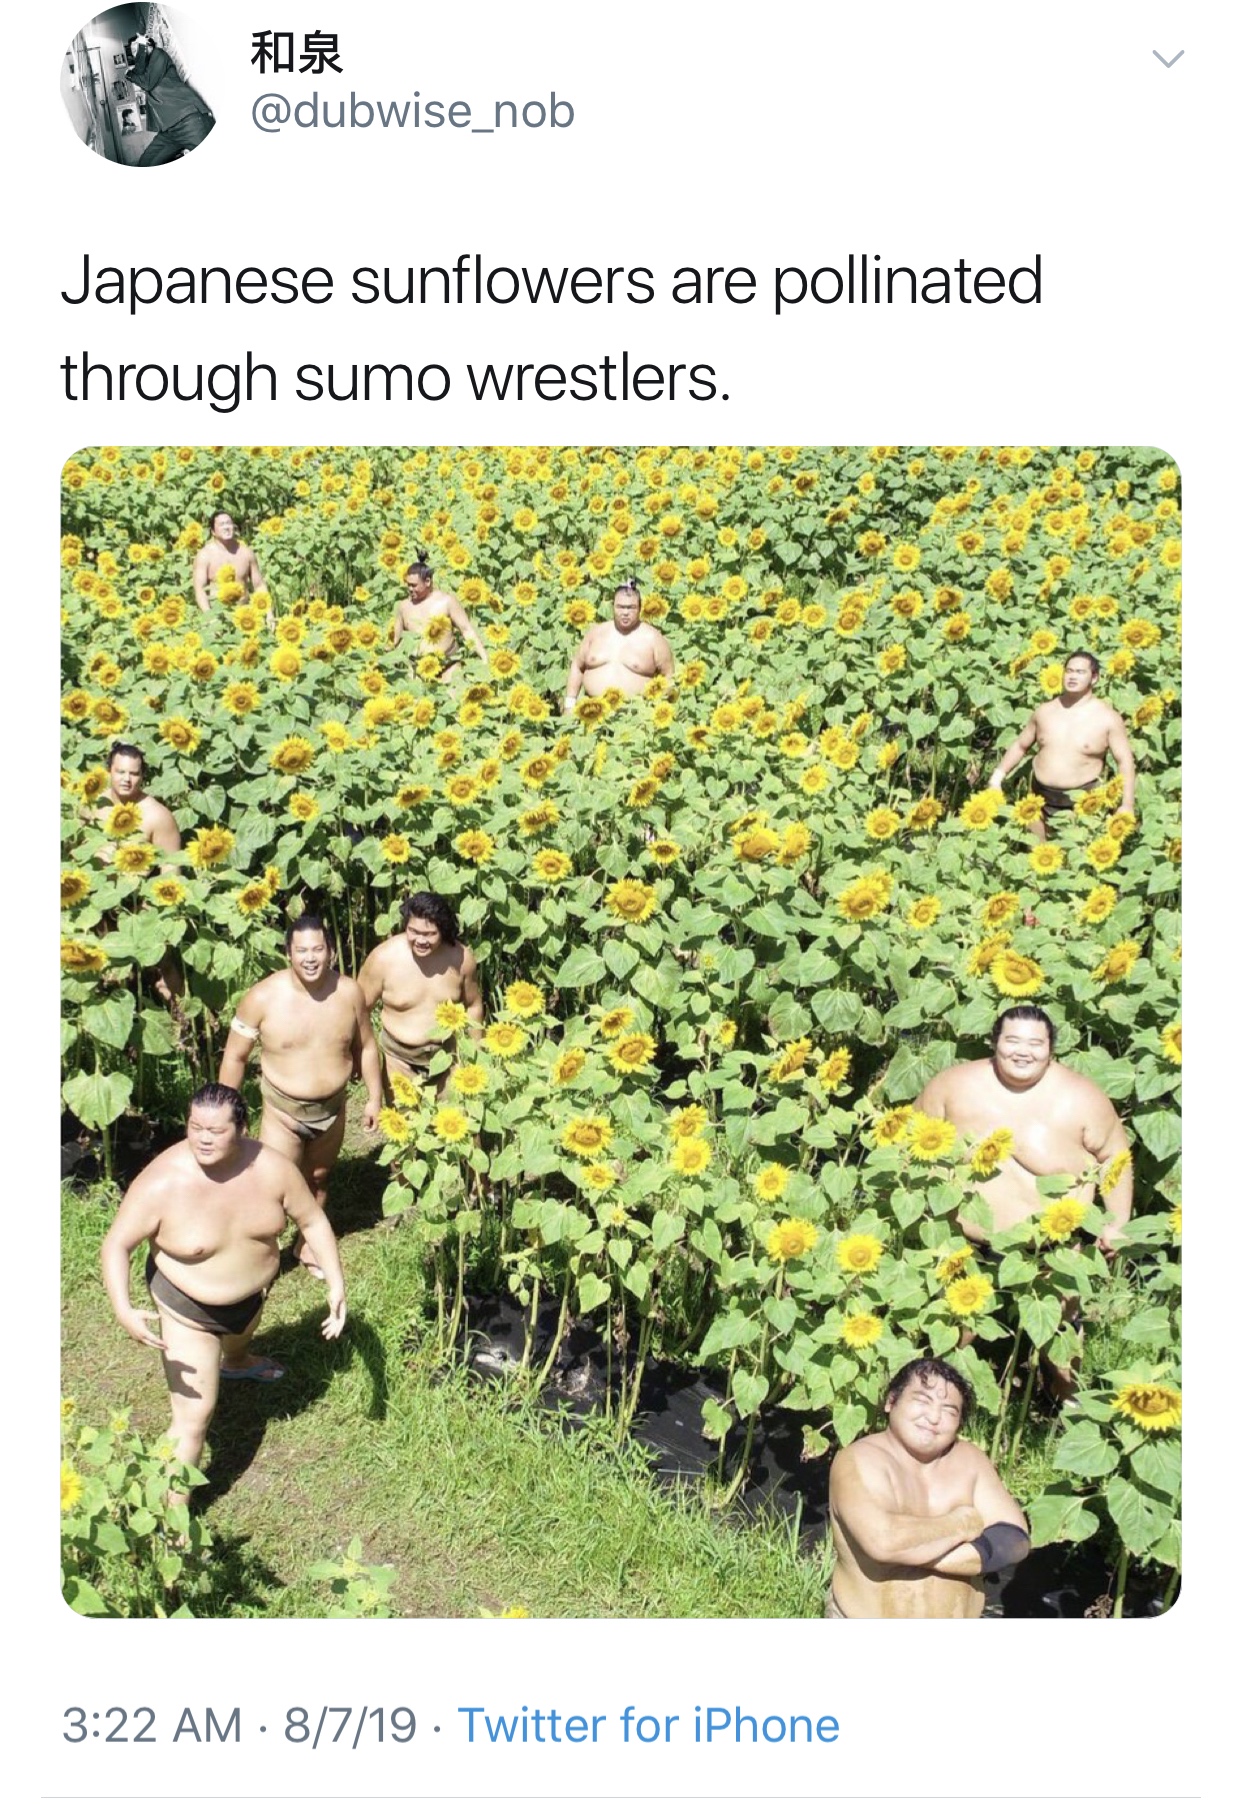 Sumo - Far Japanese sunflowers are pollinated through sumo wrestlers. 8719. Twitter for iPhone